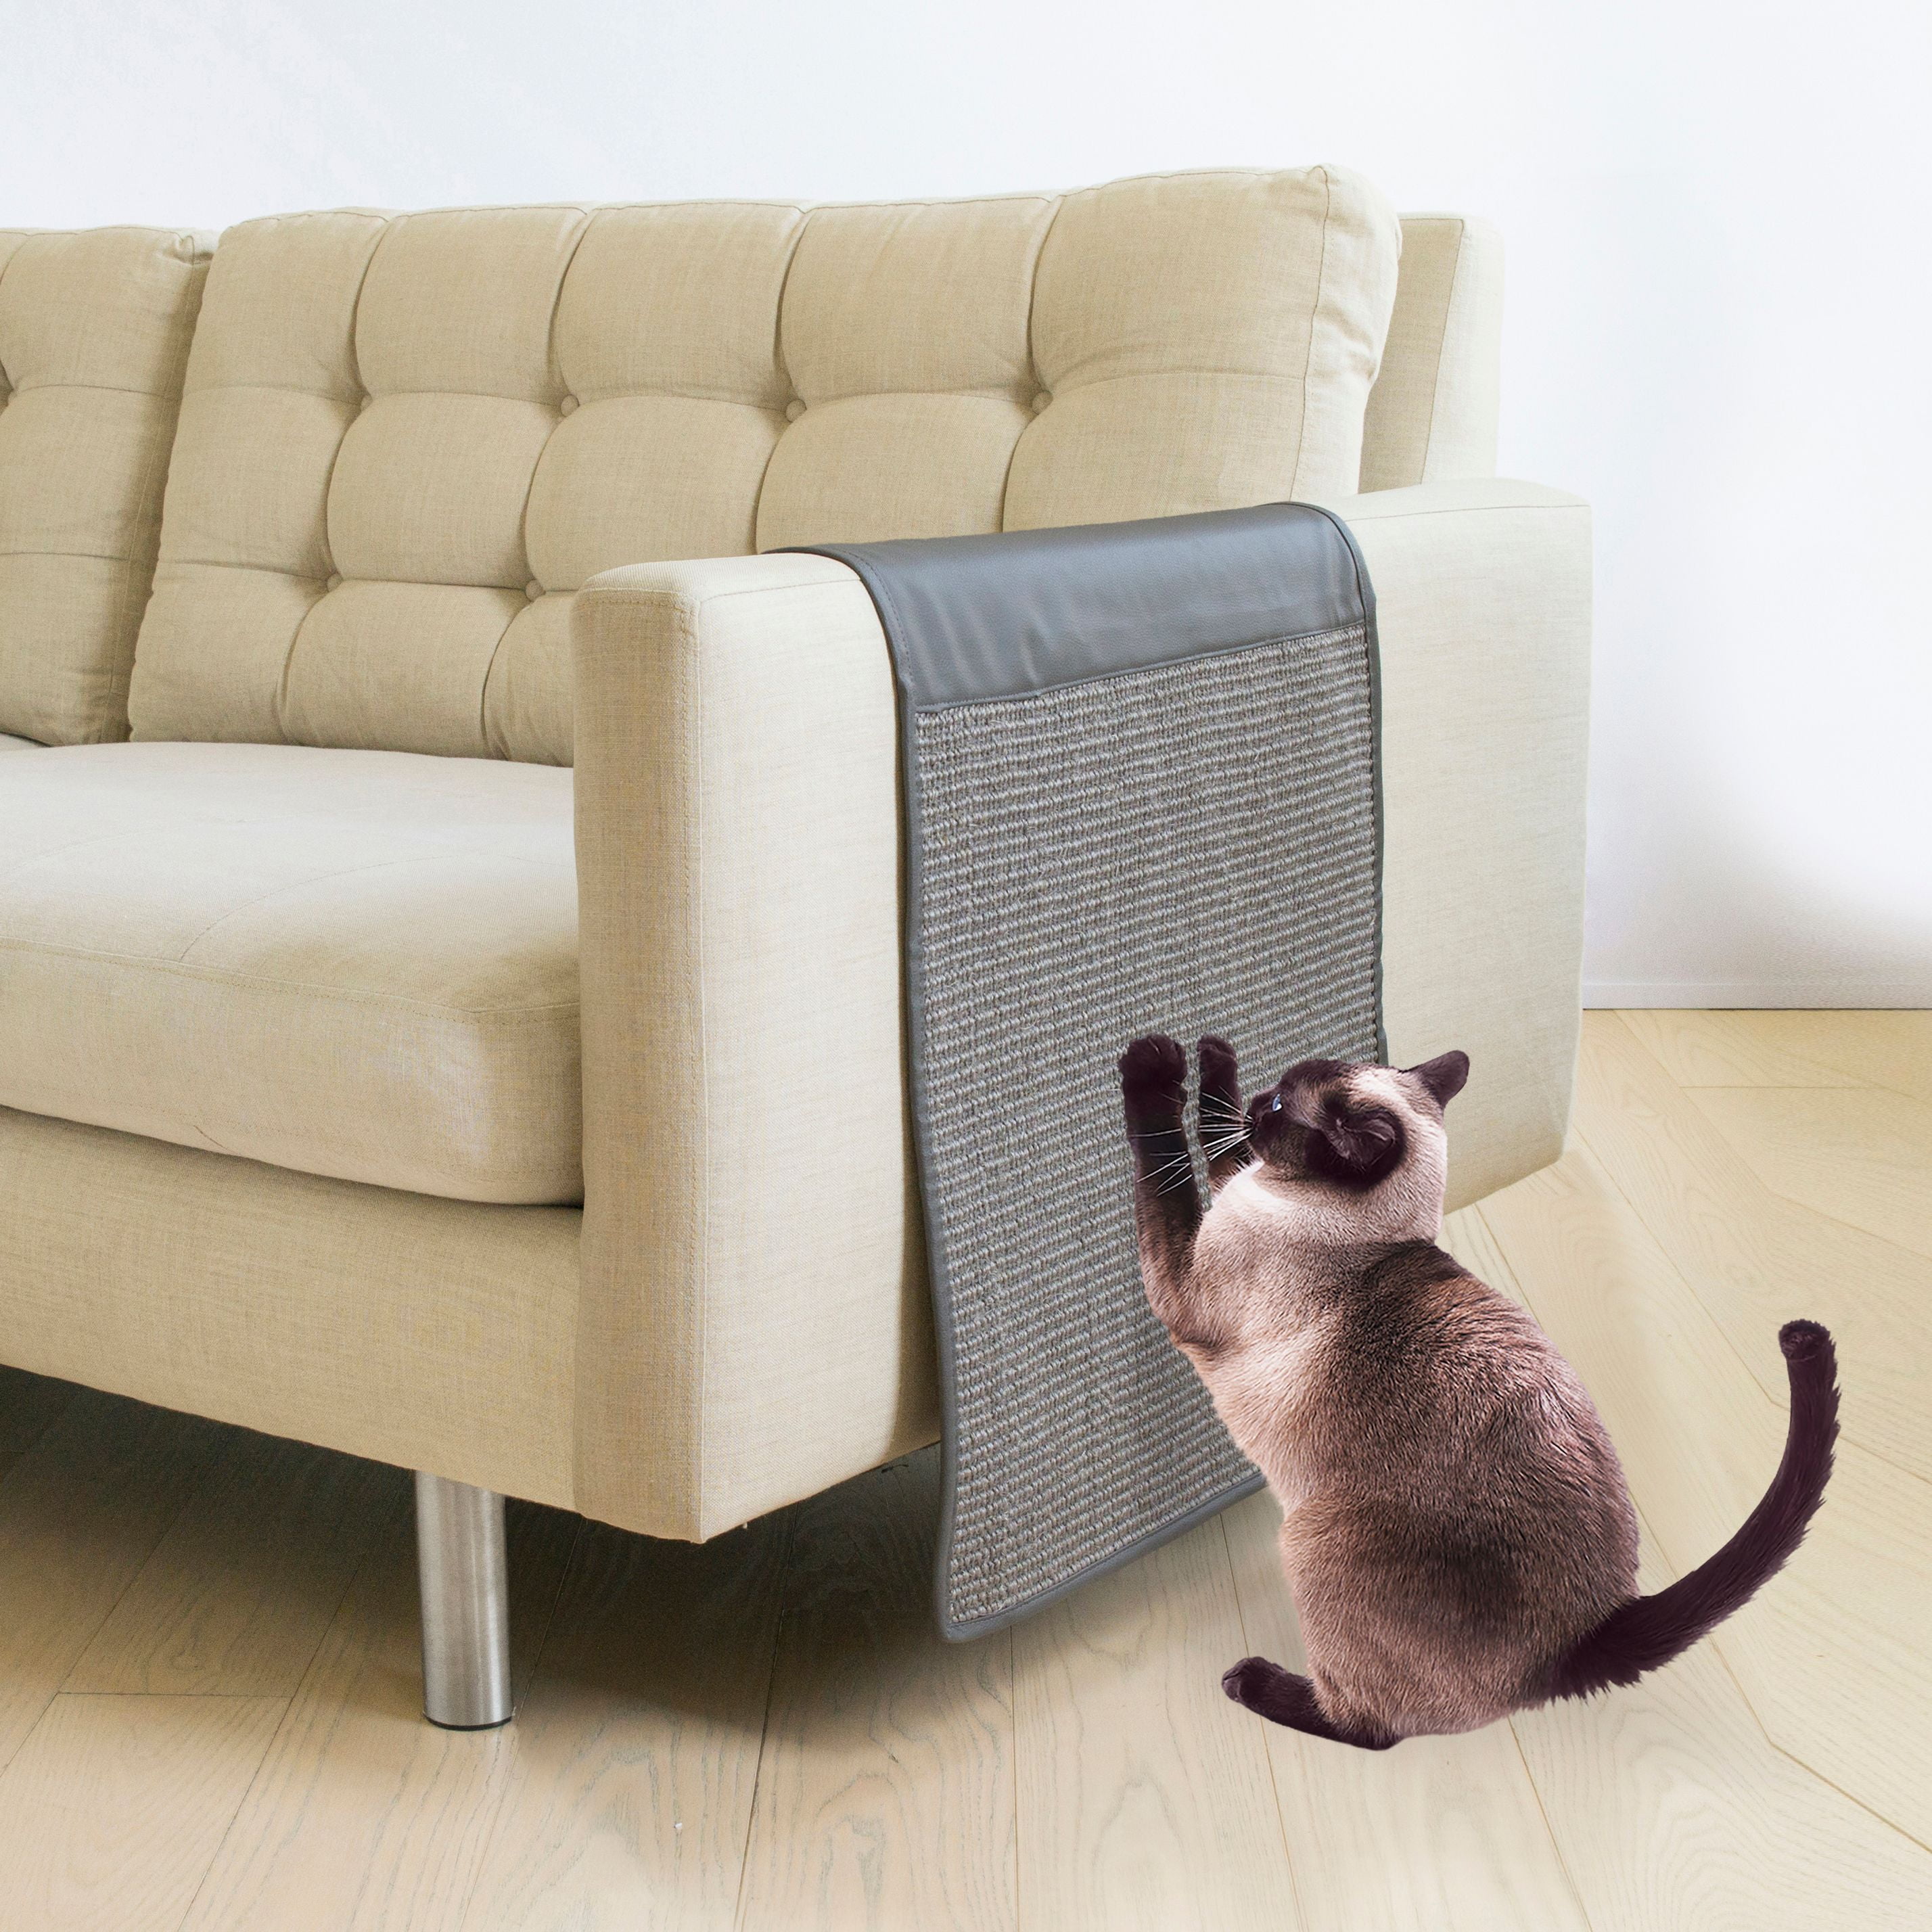 Precious Tails Cat Scratching Sofa, Can I Have A Leather Sofa With Cats